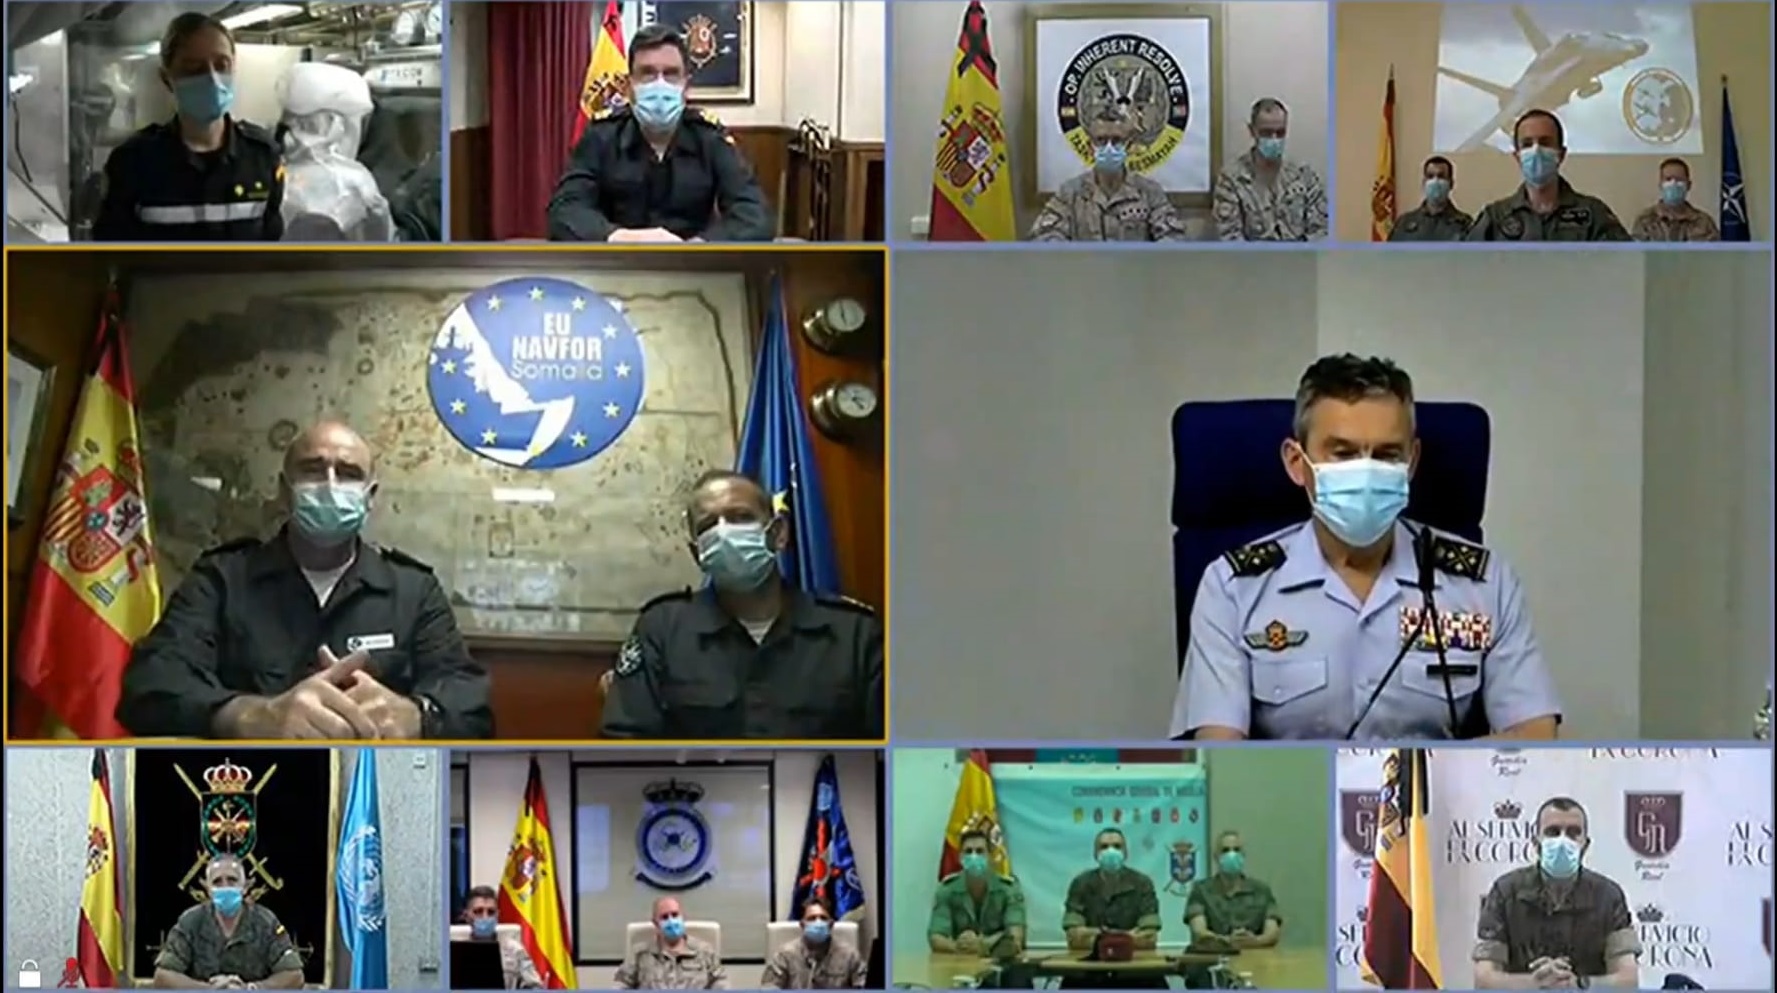 King Felipe VI holds a videoconference to congratulate Spanish troops deployed overseas and those participating in national soil